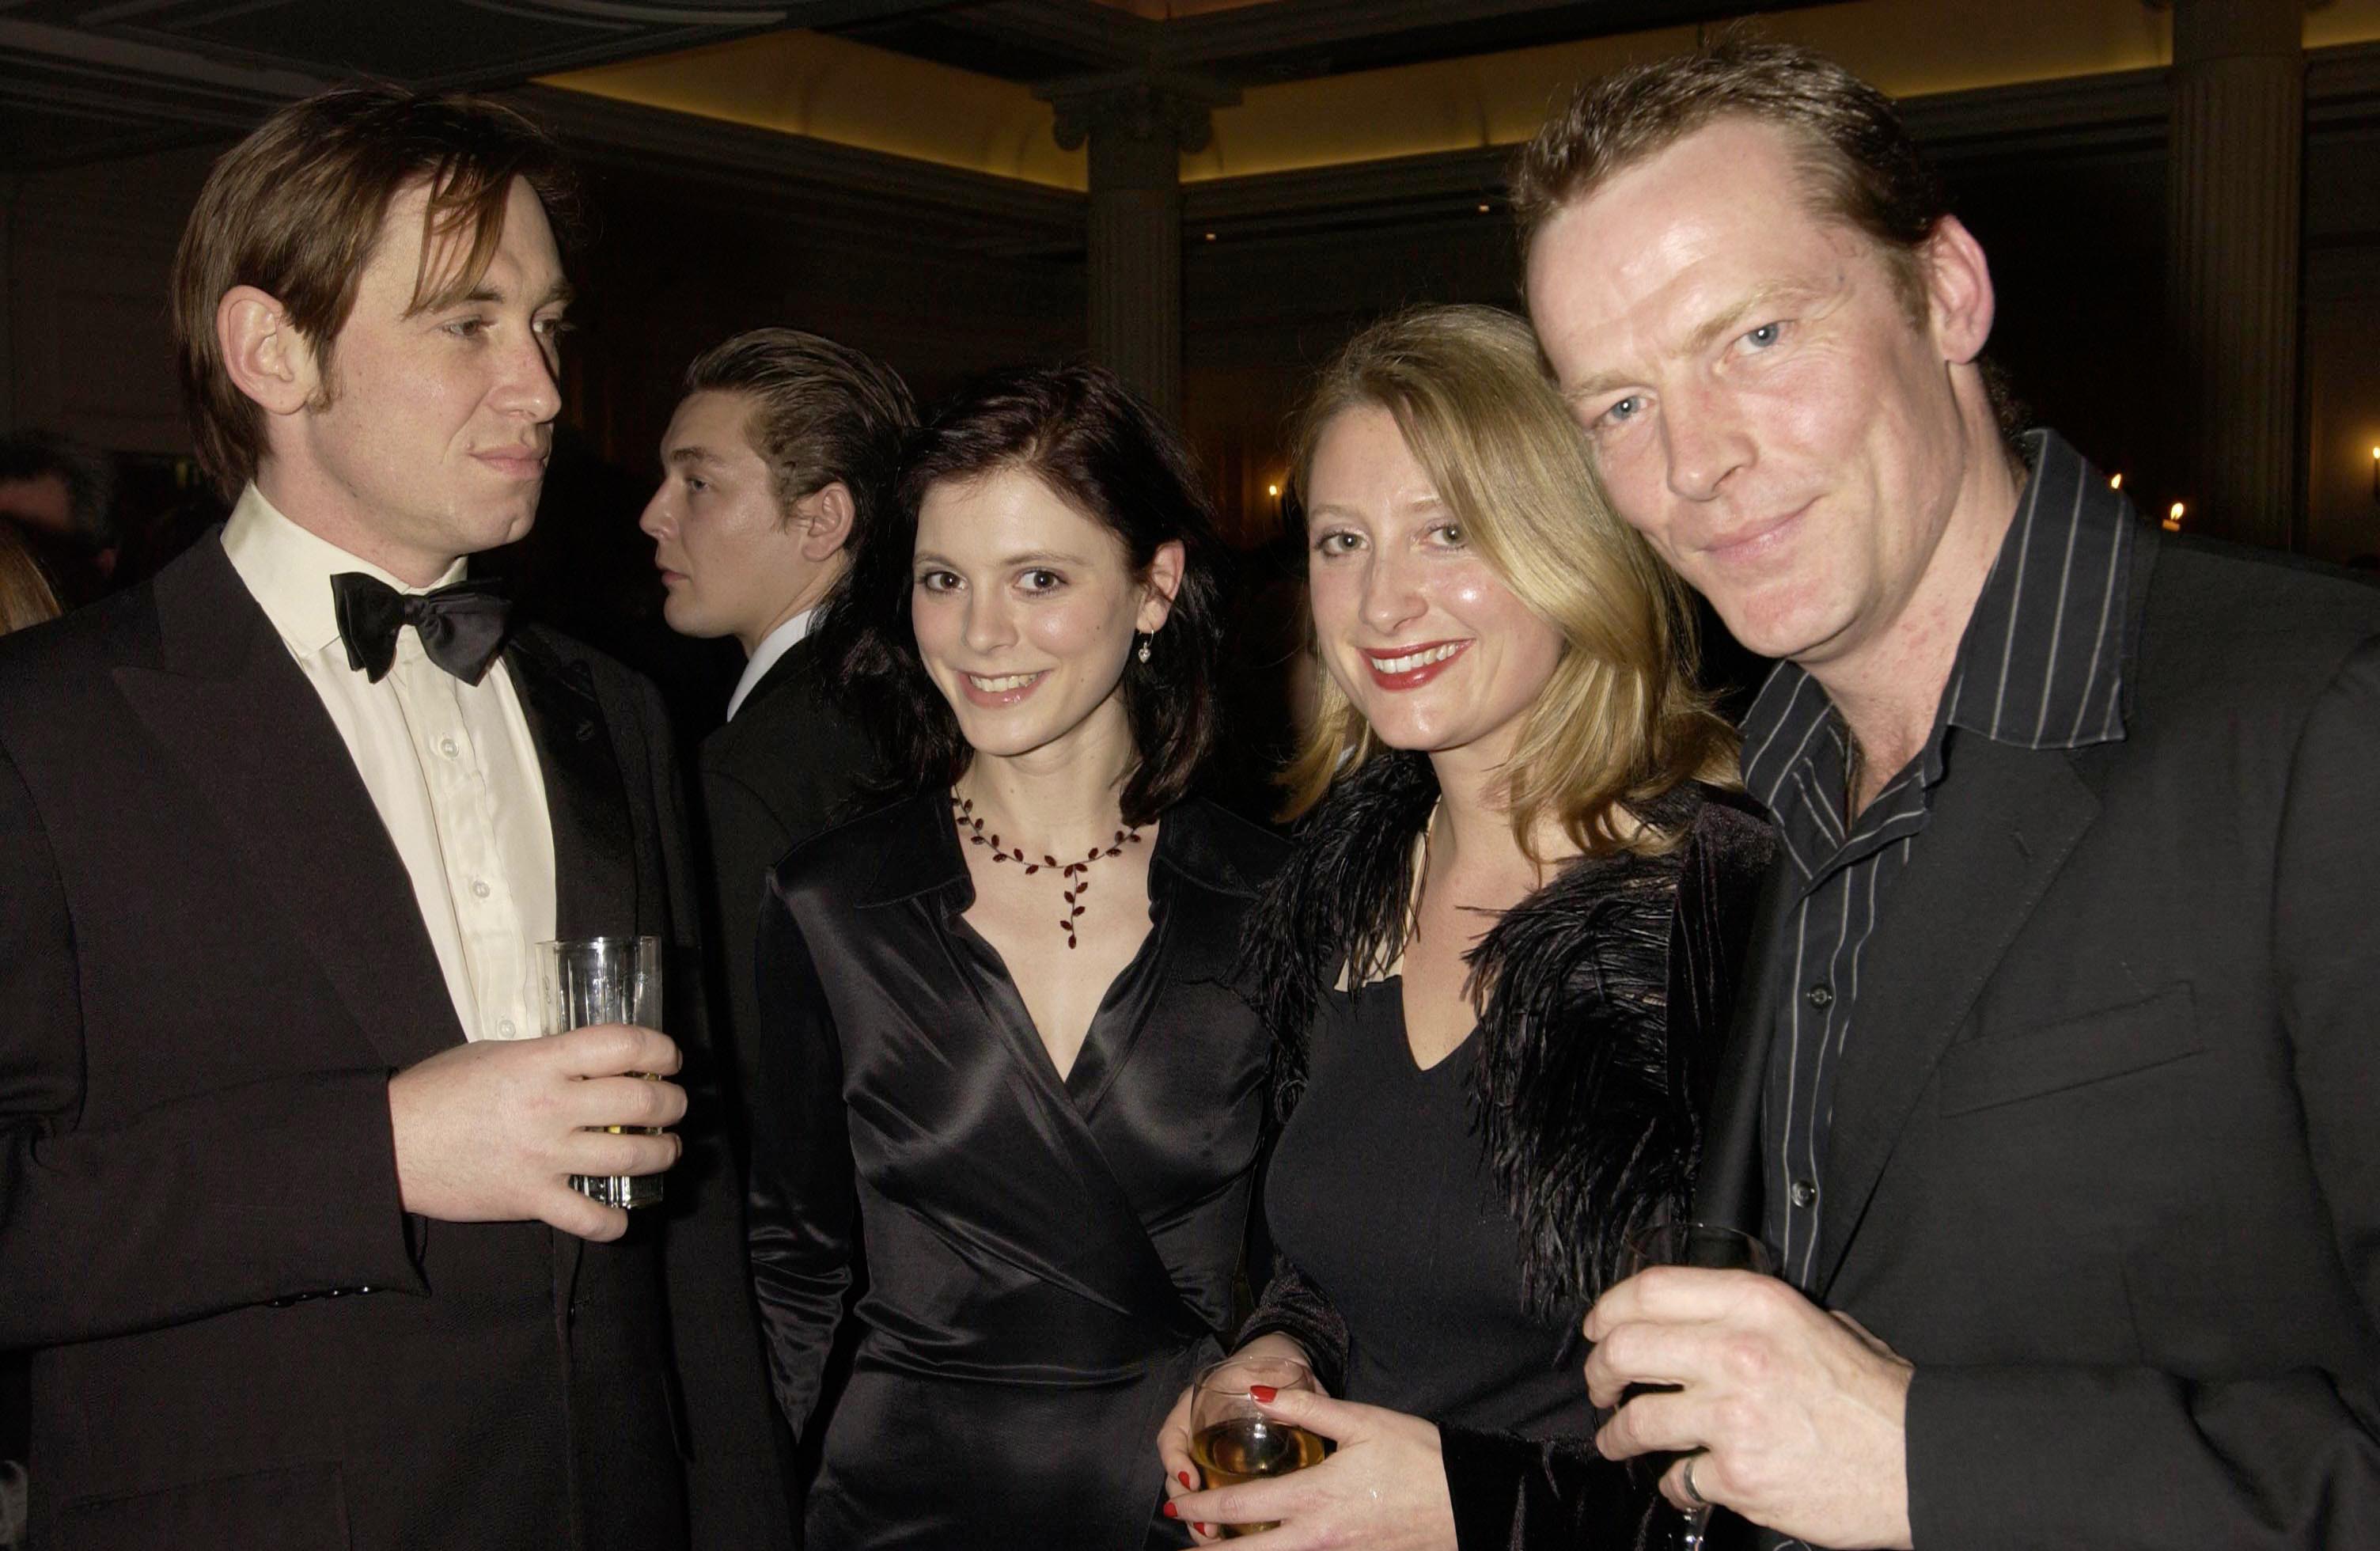 Amelia Fox, Susannah Harker and Iain Glen at the Evening Standard Film Awards on February 3, 2002, in London, England. | Source: Getty Images